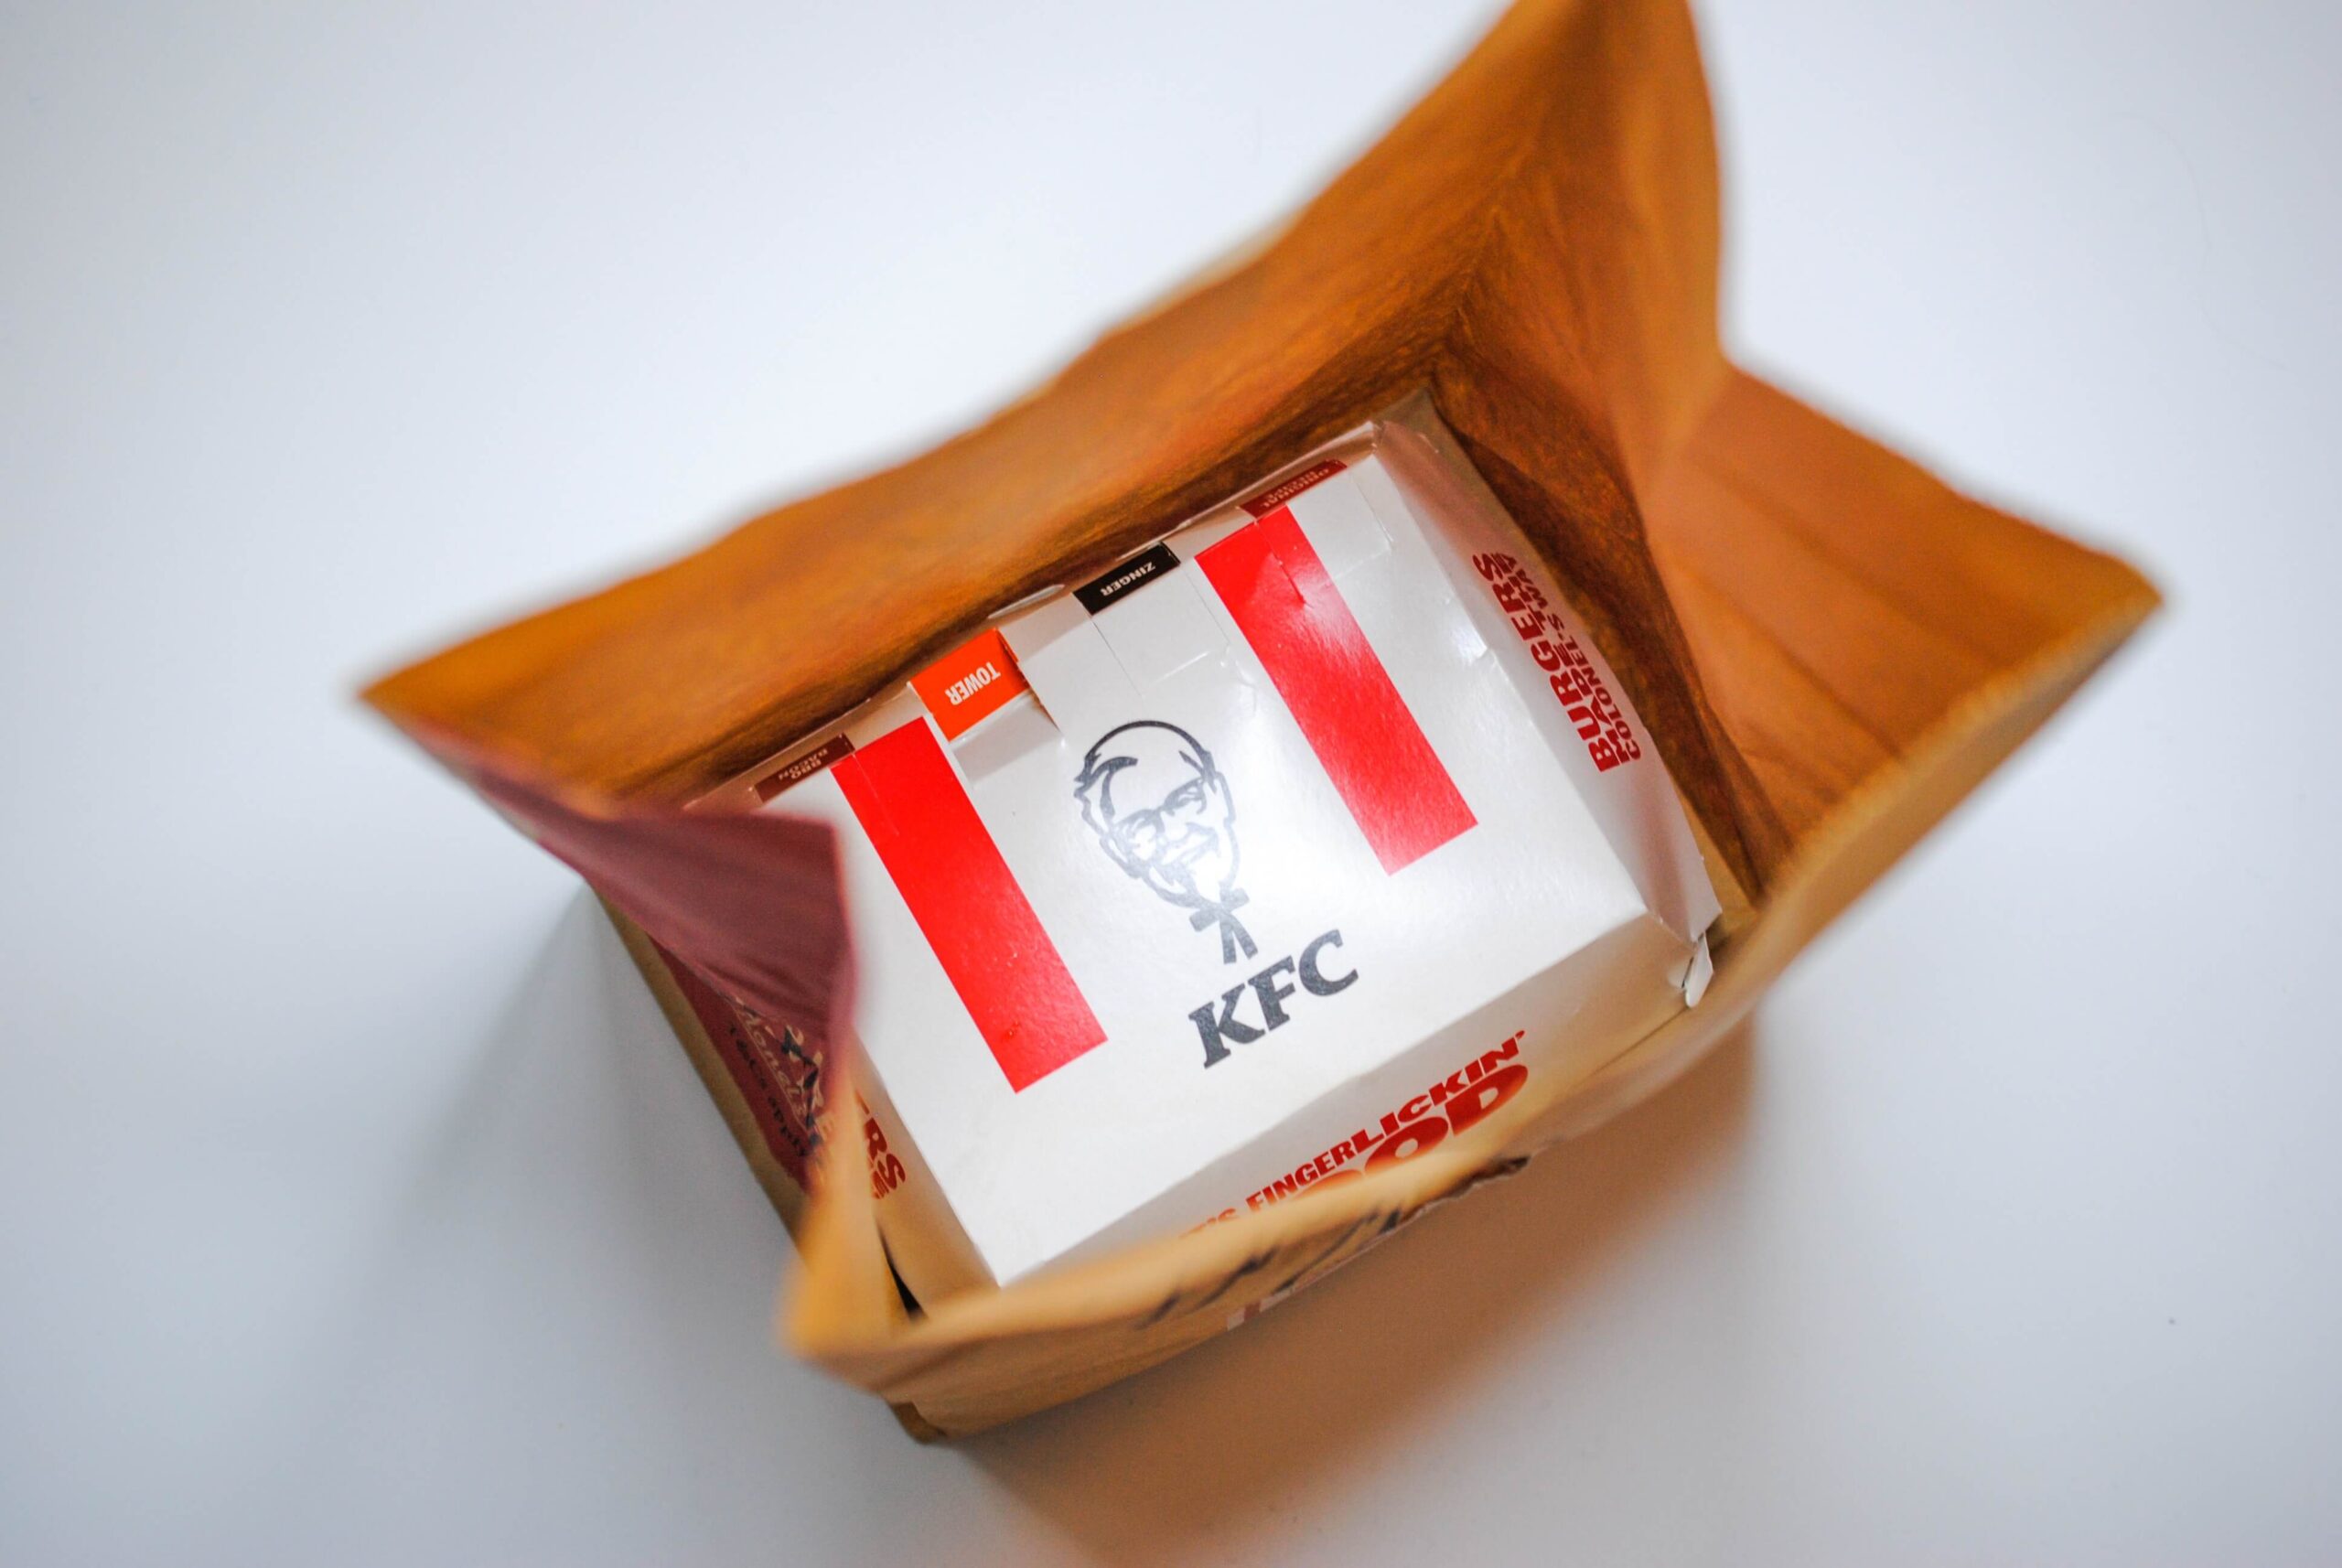 A bird's eye view of the KFC packaging with the tagline (it's finger lickin' good) partly visible.